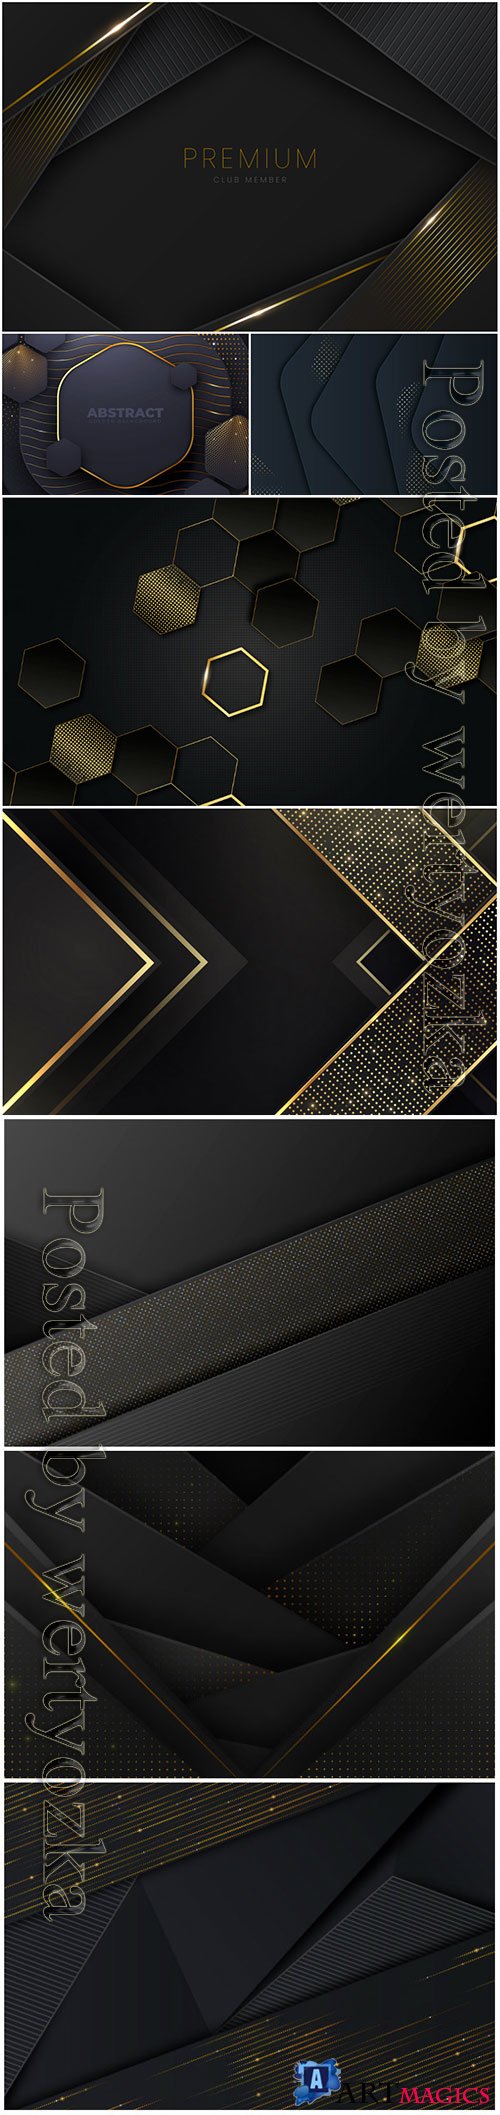 Luxury abstract backgrounds in vector